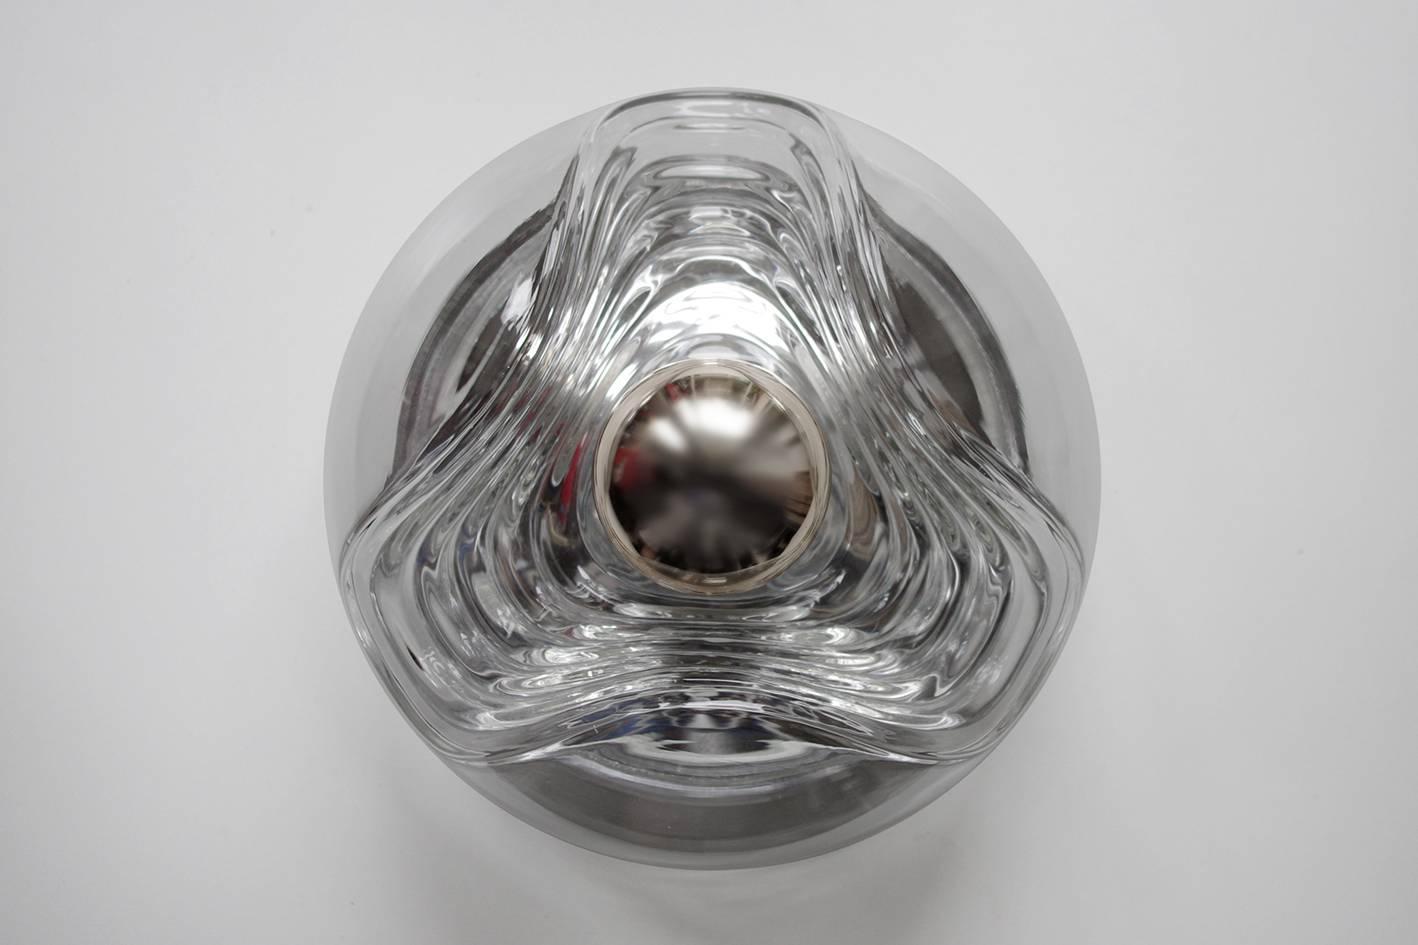 Pair of organic sculptural clear glass flush mounts.
Germany, 1960s-1970s.

Lamp sockets: 1 x E27 (US E26)